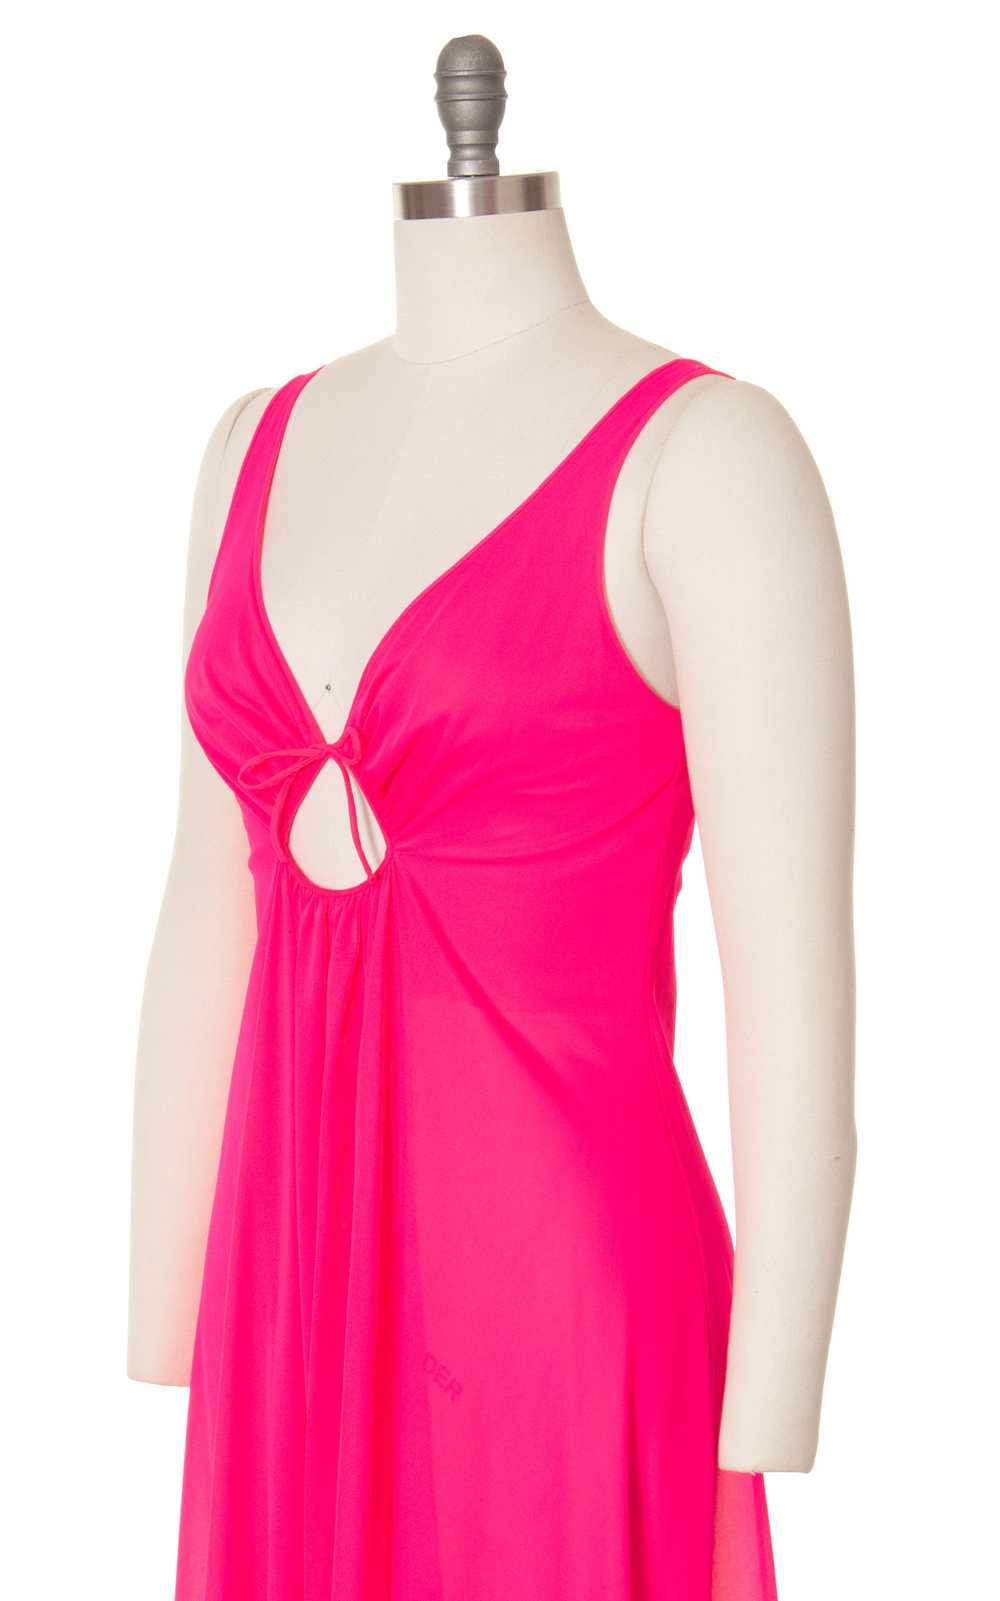 1970s Neon Hot Pink Nightgown | small/medium/large - image 7